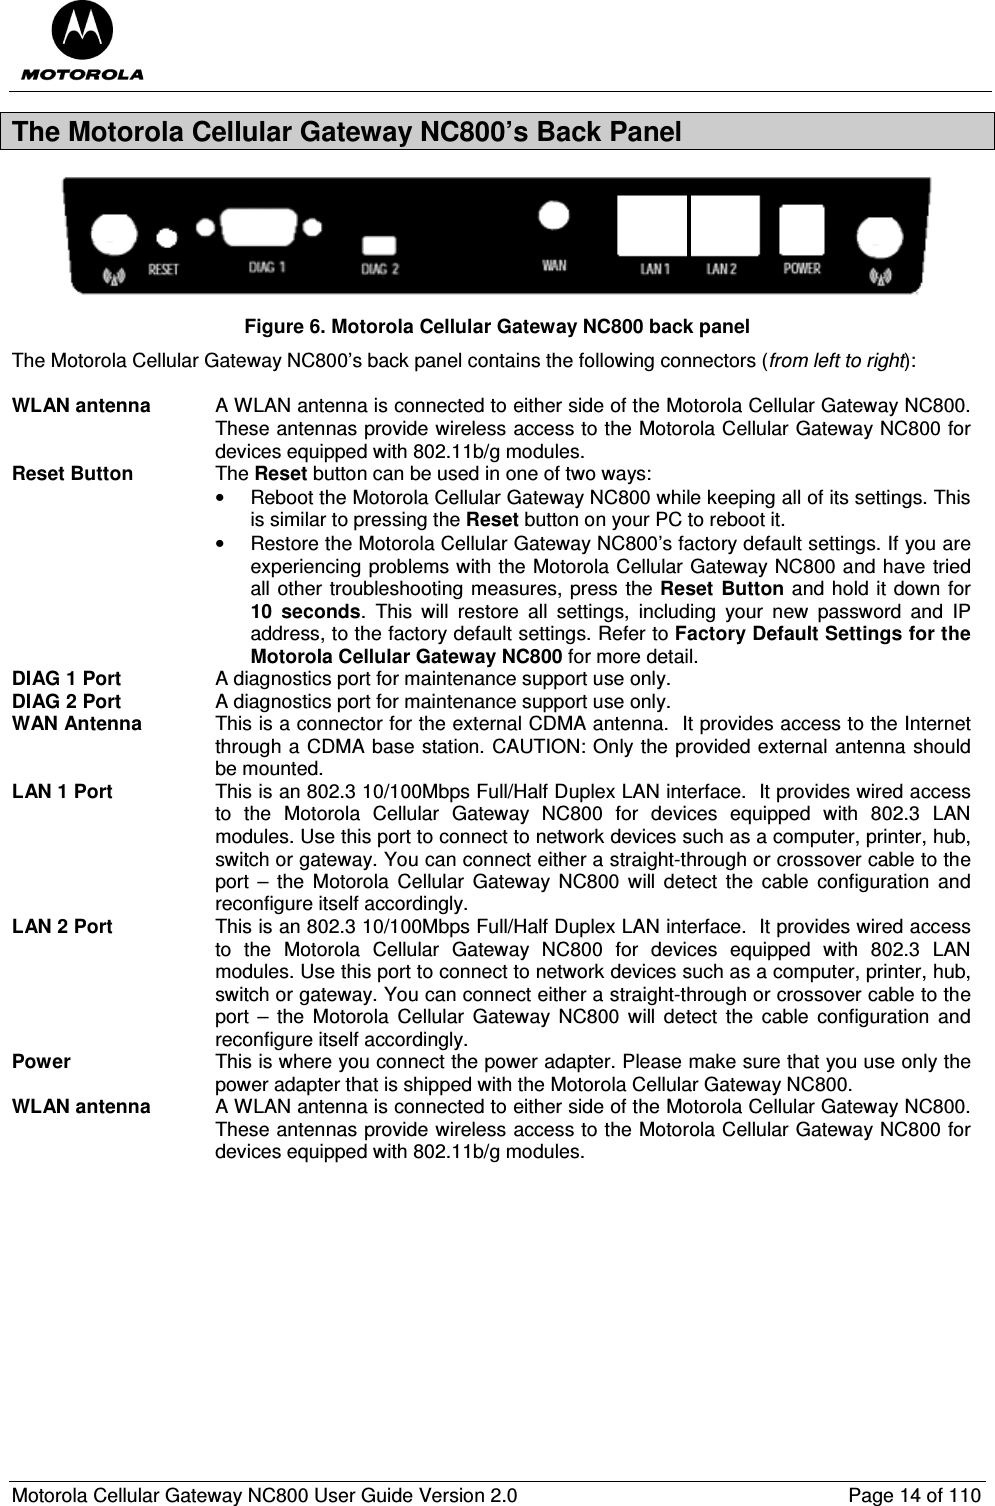  Motorola Cellular Gateway NC800 User Guide Version 2.0     Page 14 of 110  The Motorola Cellular Gateway NC800’s Back Panel  Figure 6. Motorola Cellular Gateway NC800 back panel The Motorola Cellular Gateway NC800’s back panel contains the following connectors (from left to right):  WLAN antenna  A WLAN antenna is connected to either side of the Motorola Cellular Gateway NC800. These antennas provide wireless access to the Motorola Cellular Gateway NC800 for devices equipped with 802.11b/g modules.  Reset Button  The Reset button can be used in one of two ways: •  Reboot the Motorola Cellular Gateway NC800 while keeping all of its settings. This is similar to pressing the Reset button on your PC to reboot it. •  Restore the Motorola Cellular Gateway NC800’s factory default settings. If you are experiencing problems with the Motorola Cellular Gateway NC800 and have tried all other troubleshooting measures, press the Reset  Button and hold it down for 10  seconds.  This  will  restore  all  settings,  including  your  new  password  and  IP address, to the factory default settings. Refer to Factory Default Settings for the Motorola Cellular Gateway NC800 for more detail.   DIAG 1 Port  A diagnostics port for maintenance support use only. DIAG 2 Port  A diagnostics port for maintenance support use only. WAN Antenna  This is a connector for the external CDMA antenna.  It provides access to the Internet through a CDMA base station. CAUTION: Only the provided external antenna should be mounted. LAN 1 Port  This is an 802.3 10/100Mbps Full/Half Duplex LAN interface.  It provides wired access to  the  Motorola  Cellular  Gateway  NC800  for  devices  equipped  with  802.3  LAN modules. Use this port to connect to network devices such as a computer, printer, hub, switch or gateway. You can connect either a straight-through or crossover cable to the port  –  the  Motorola  Cellular  Gateway  NC800  will  detect  the  cable  configuration  and reconfigure itself accordingly. LAN 2 Port  This is an 802.3 10/100Mbps Full/Half Duplex LAN interface.  It provides wired access to  the  Motorola  Cellular  Gateway  NC800  for  devices  equipped  with  802.3  LAN modules. Use this port to connect to network devices such as a computer, printer, hub, switch or gateway. You can connect either a straight-through or crossover cable to the port  –  the  Motorola  Cellular  Gateway  NC800  will  detect  the  cable  configuration  and reconfigure itself accordingly. Power  This is where you connect the power adapter. Please make sure that you use only the power adapter that is shipped with the Motorola Cellular Gateway NC800. WLAN antenna  A WLAN antenna is connected to either side of the Motorola Cellular Gateway NC800. These antennas provide wireless access to the Motorola Cellular Gateway NC800 for devices equipped with 802.11b/g modules.              